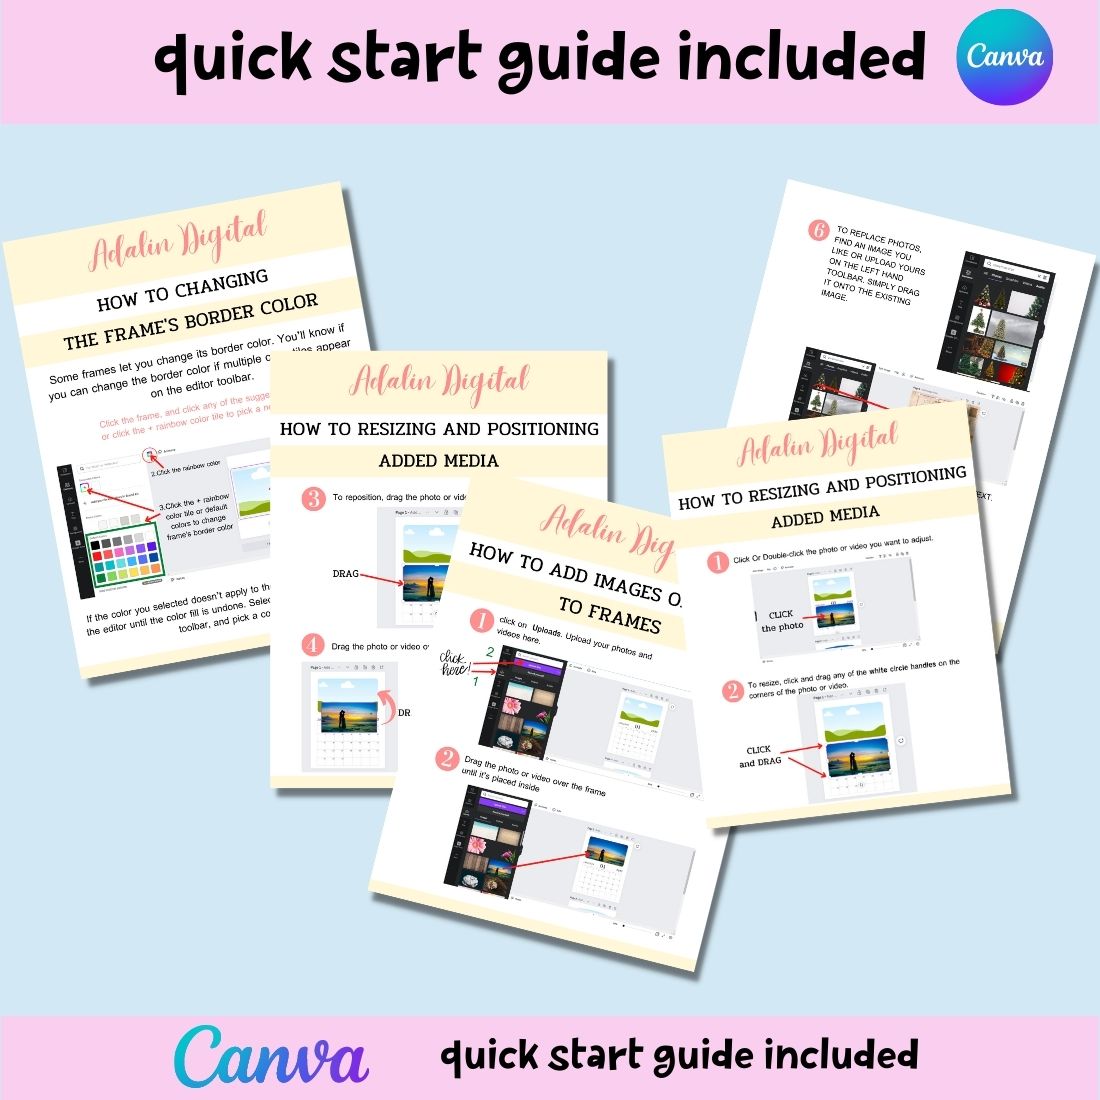 The quick start guide includes instructions for creating a quick start guide.